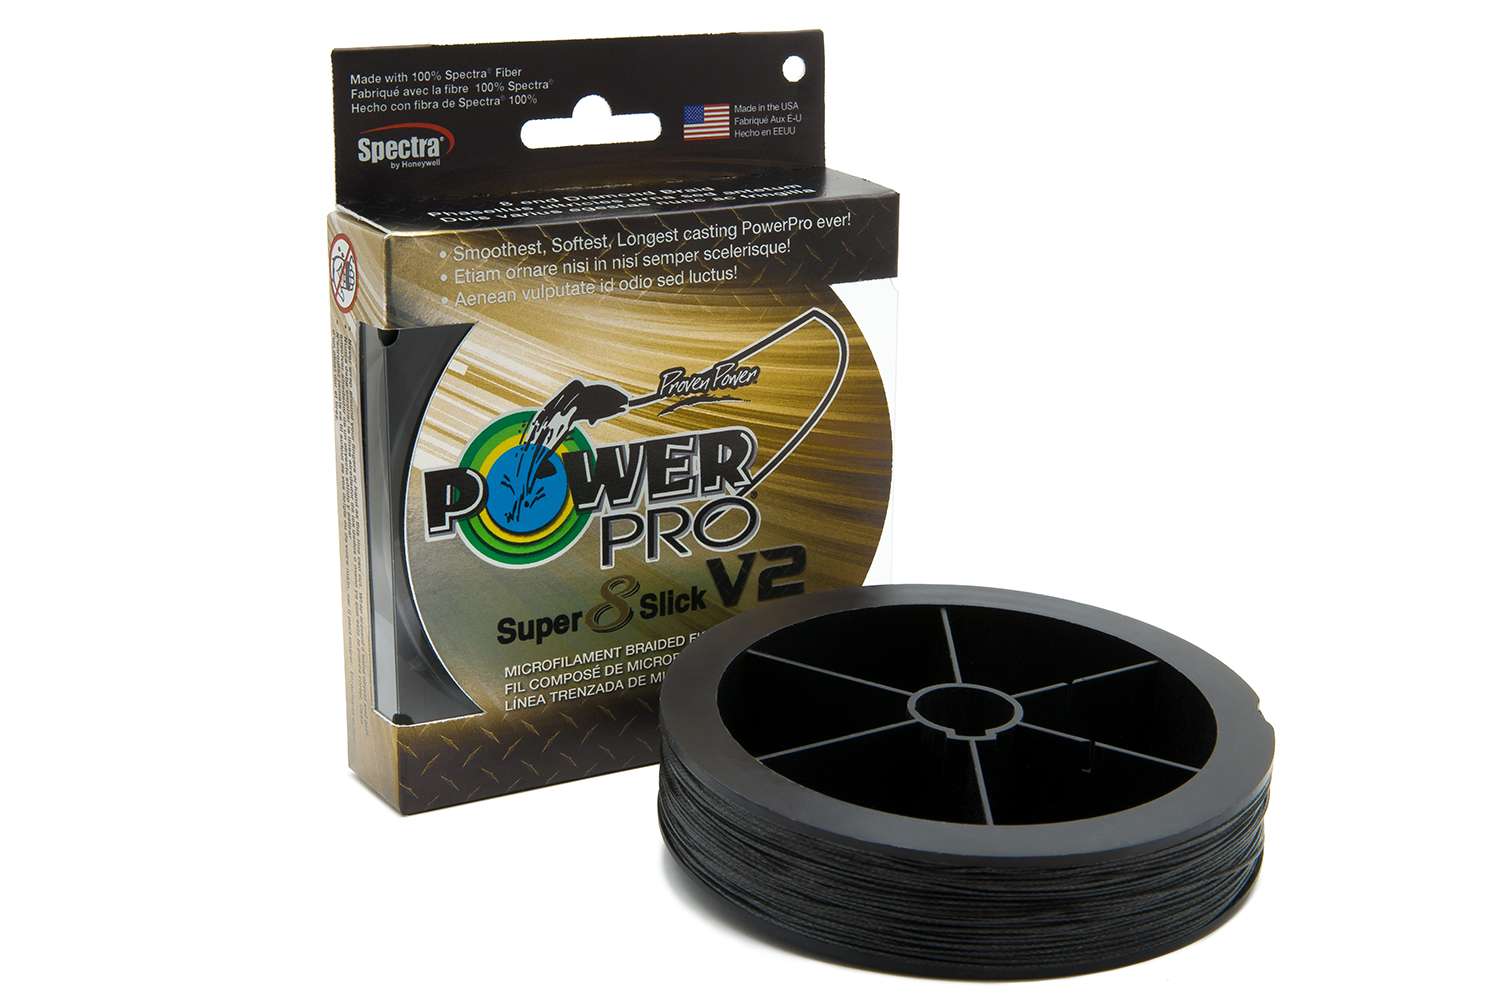 <b>PowerPro SuperSlick 8 V2</b></p> <br>This new line has been re-engineered for a whole new level of toughness. Combining a new 8-end, dense weave construction with the proven EBT coating process, SSV2 now delivers all of the smooth, silent benefits of original SuperSlick, plus added abrasion toughness that provides the power to rip through the heaviest cover with the same force as traditional 4-end braids. Available in traditional Blue, the popular Moss Green and now introducing Hi-Vis Aqua Green for the visibility minded angler, and Onyx for those looking to catch the monster Bass.